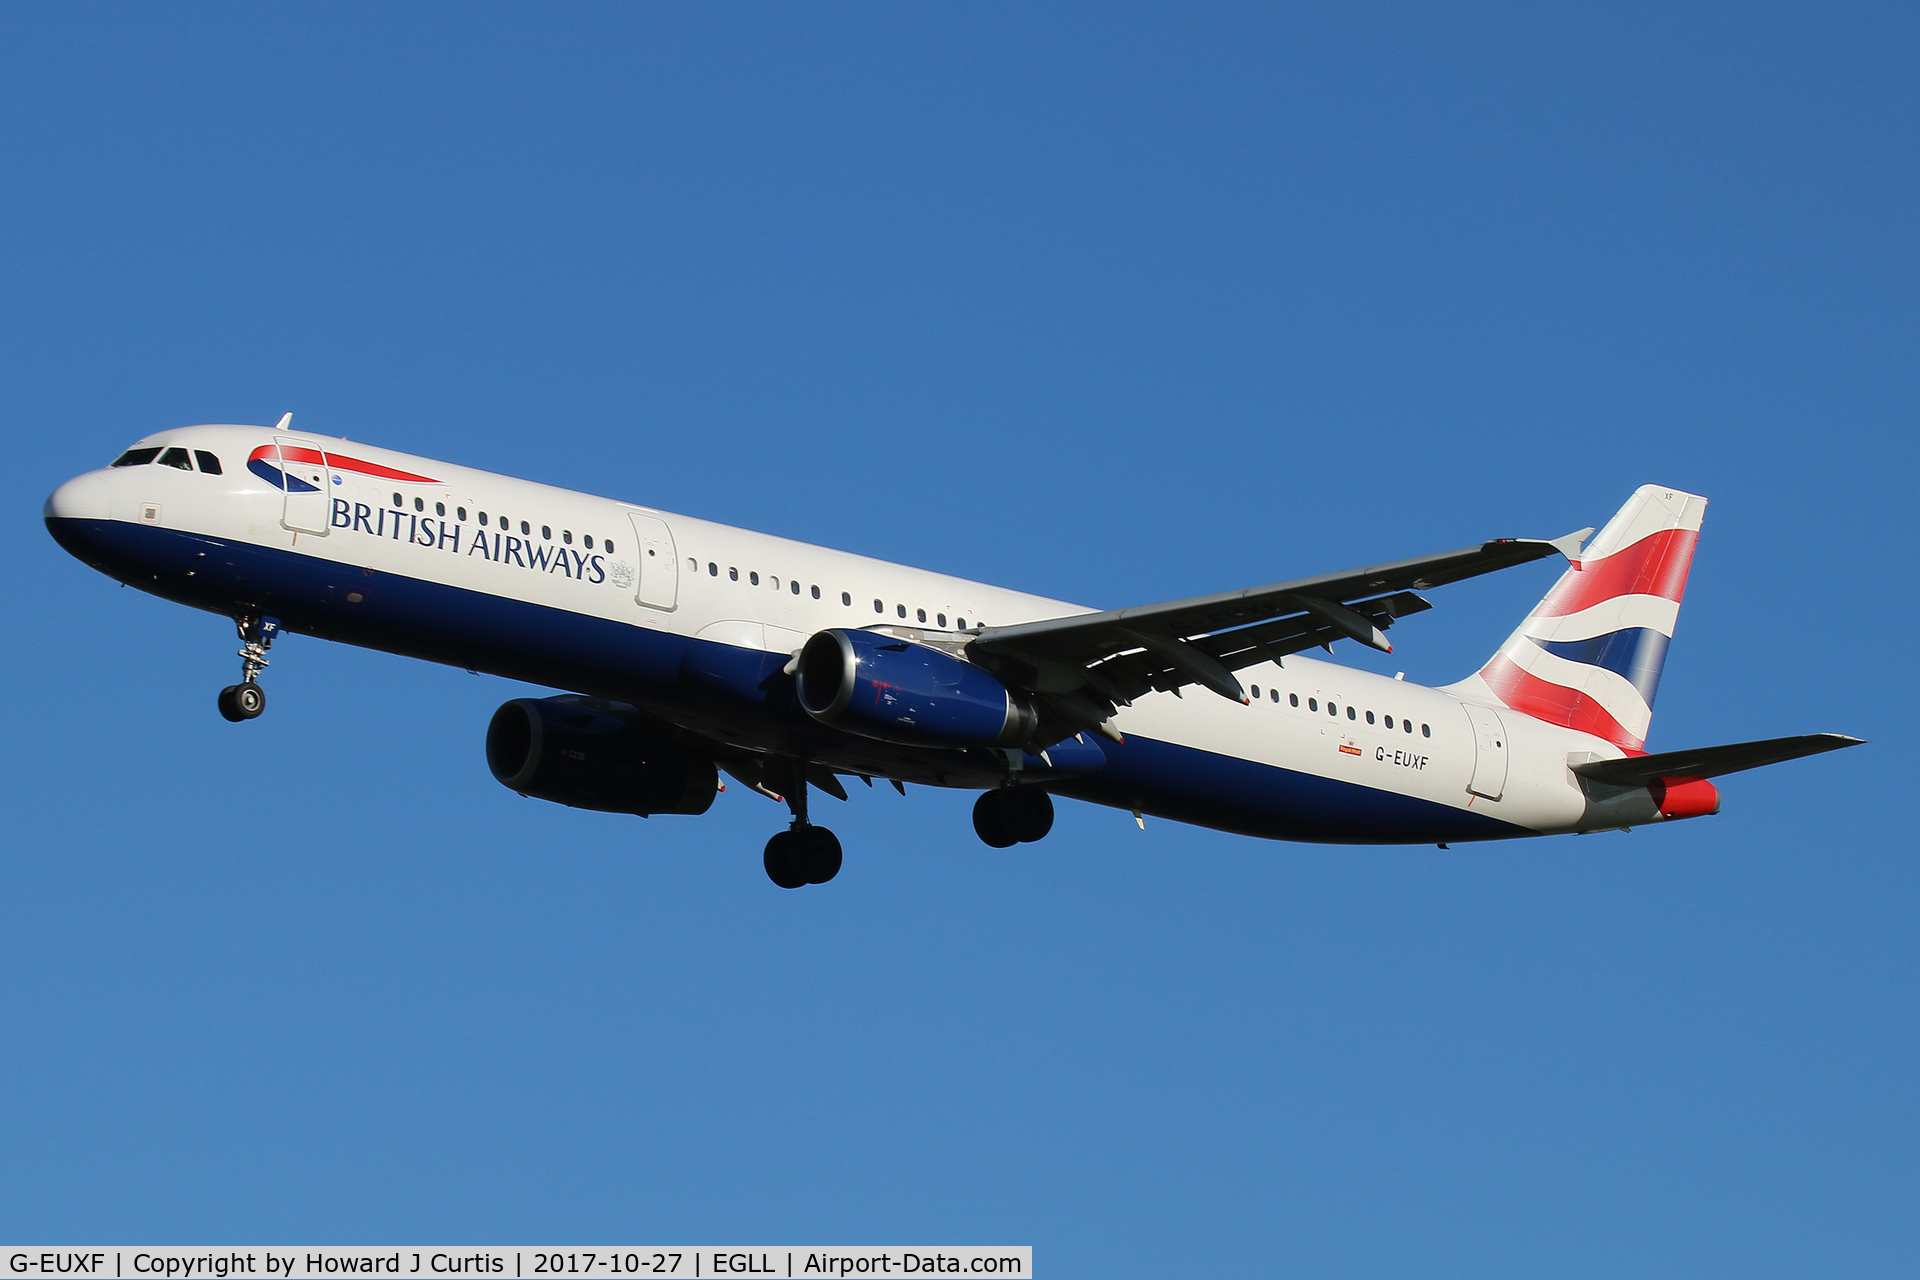 G-EUXF, 2004 Airbus A321-231 C/N 2324, On approach.